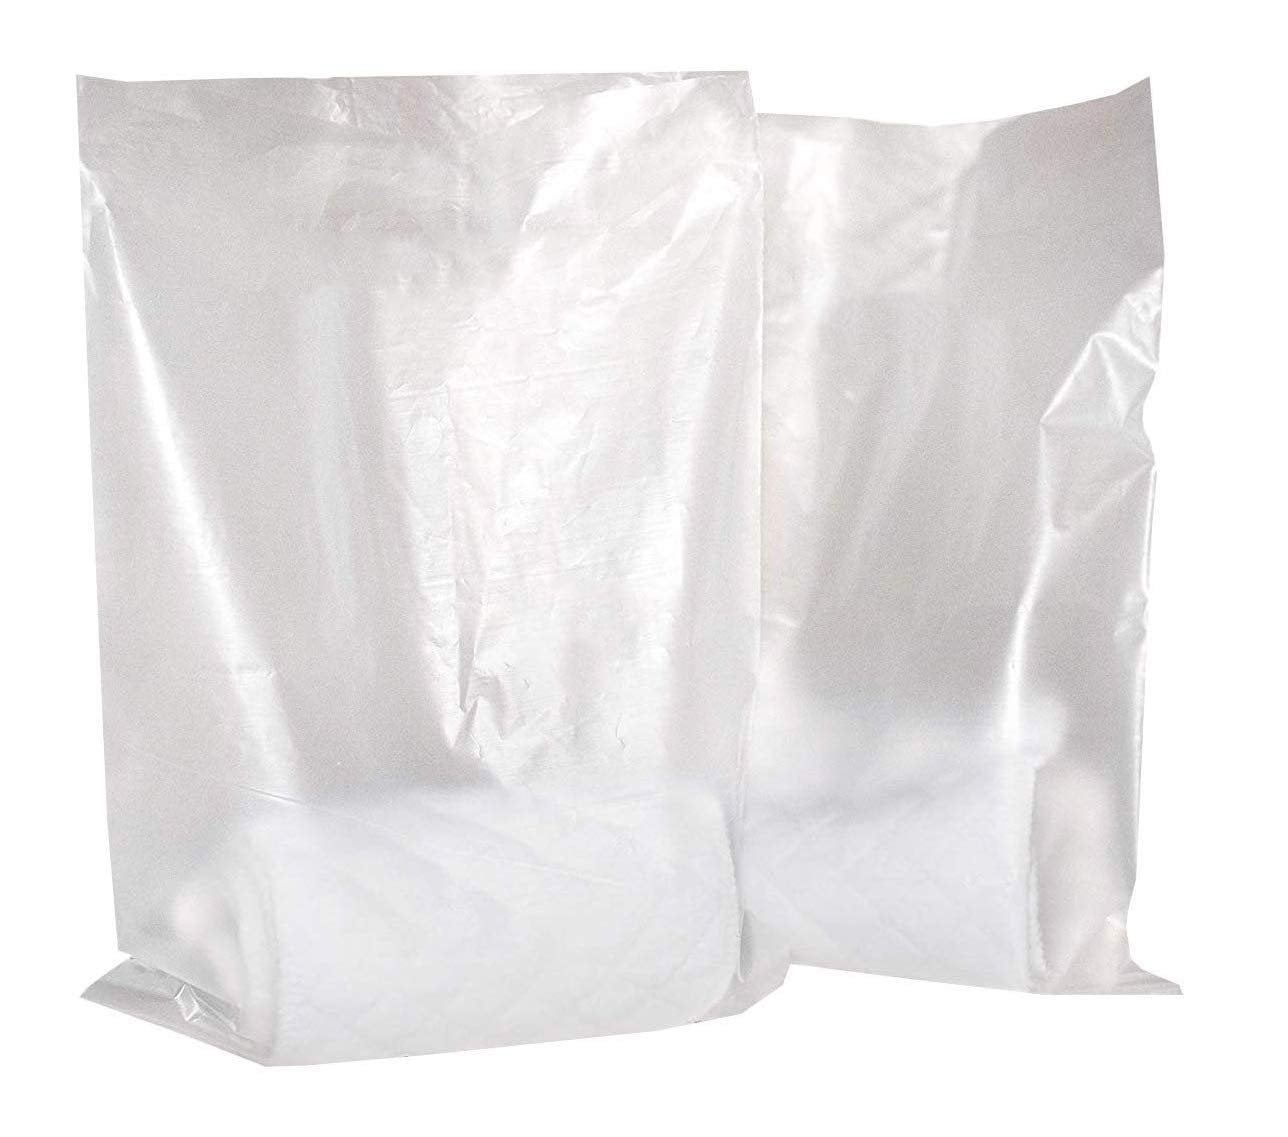 900-1000 CLEAR POLY BAGS 3 x 30 PLASTIC OPEN TOP 2 MIL 